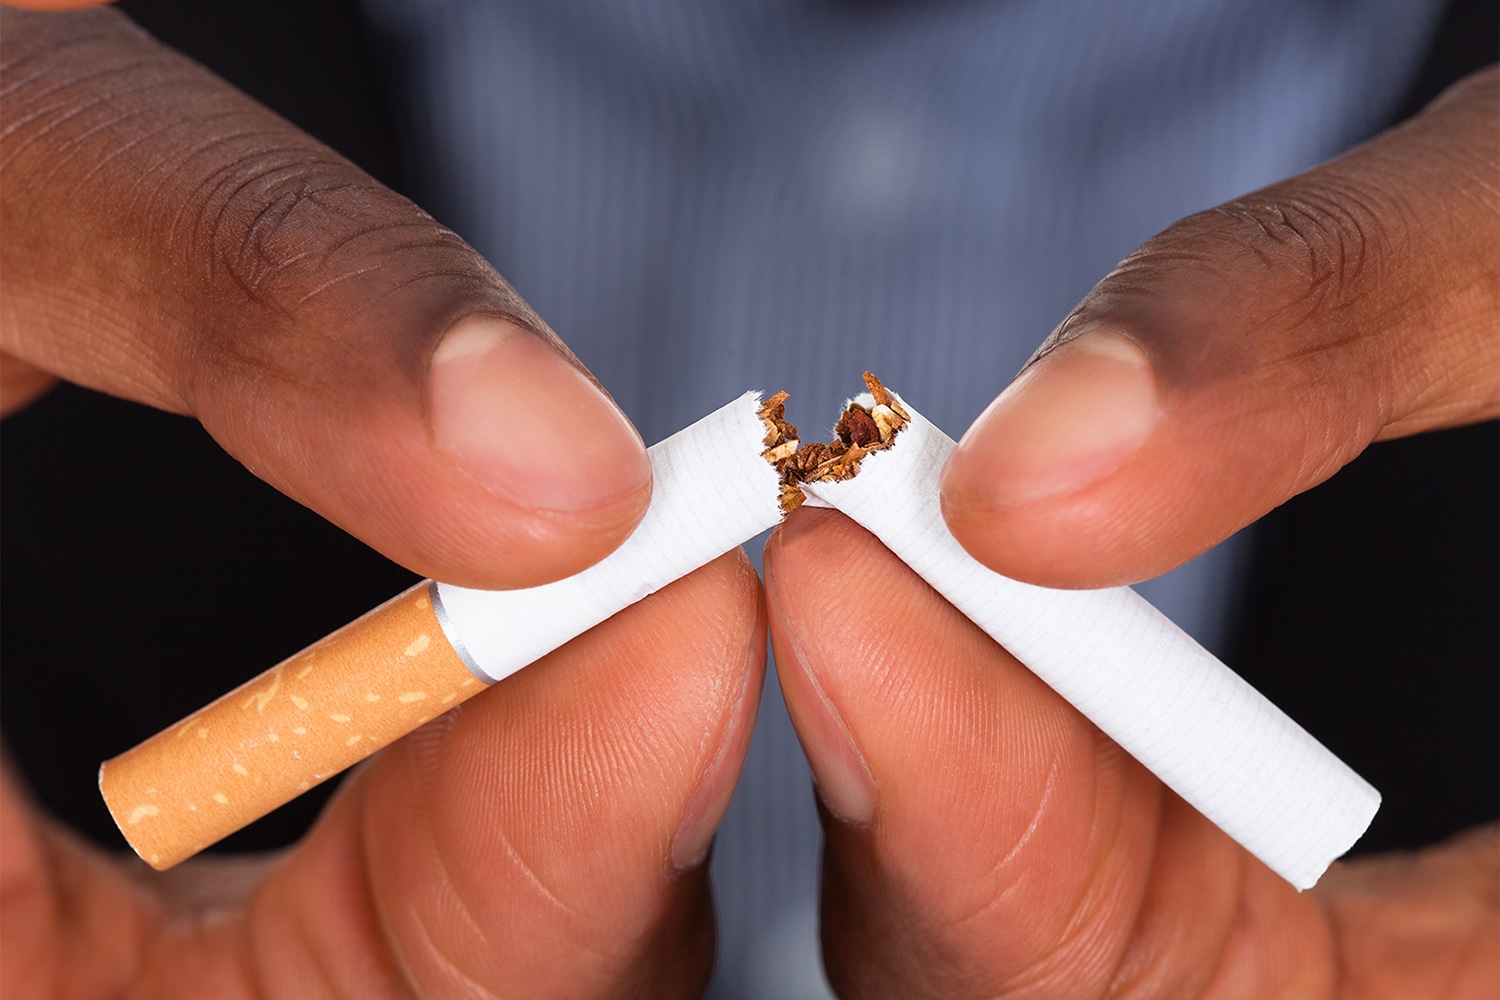 The FDA Takes Steps to Curb Tobacco Use